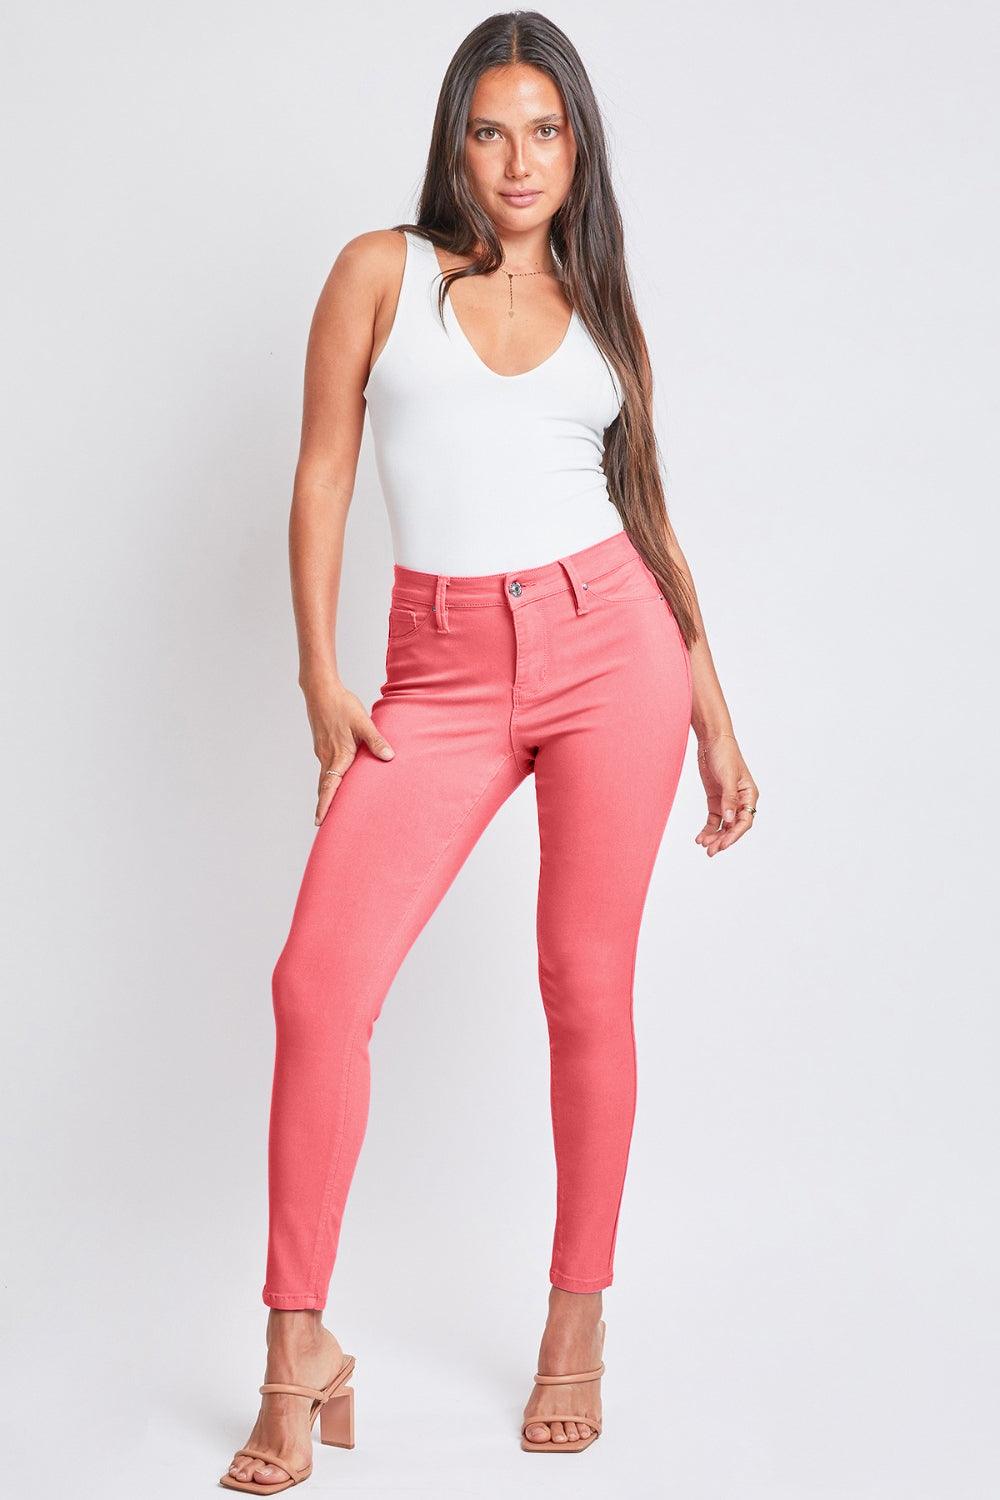 YMI Jeanswear Full Size Hyperstretch Mid-Rise Skinny Jeans Shell Pink